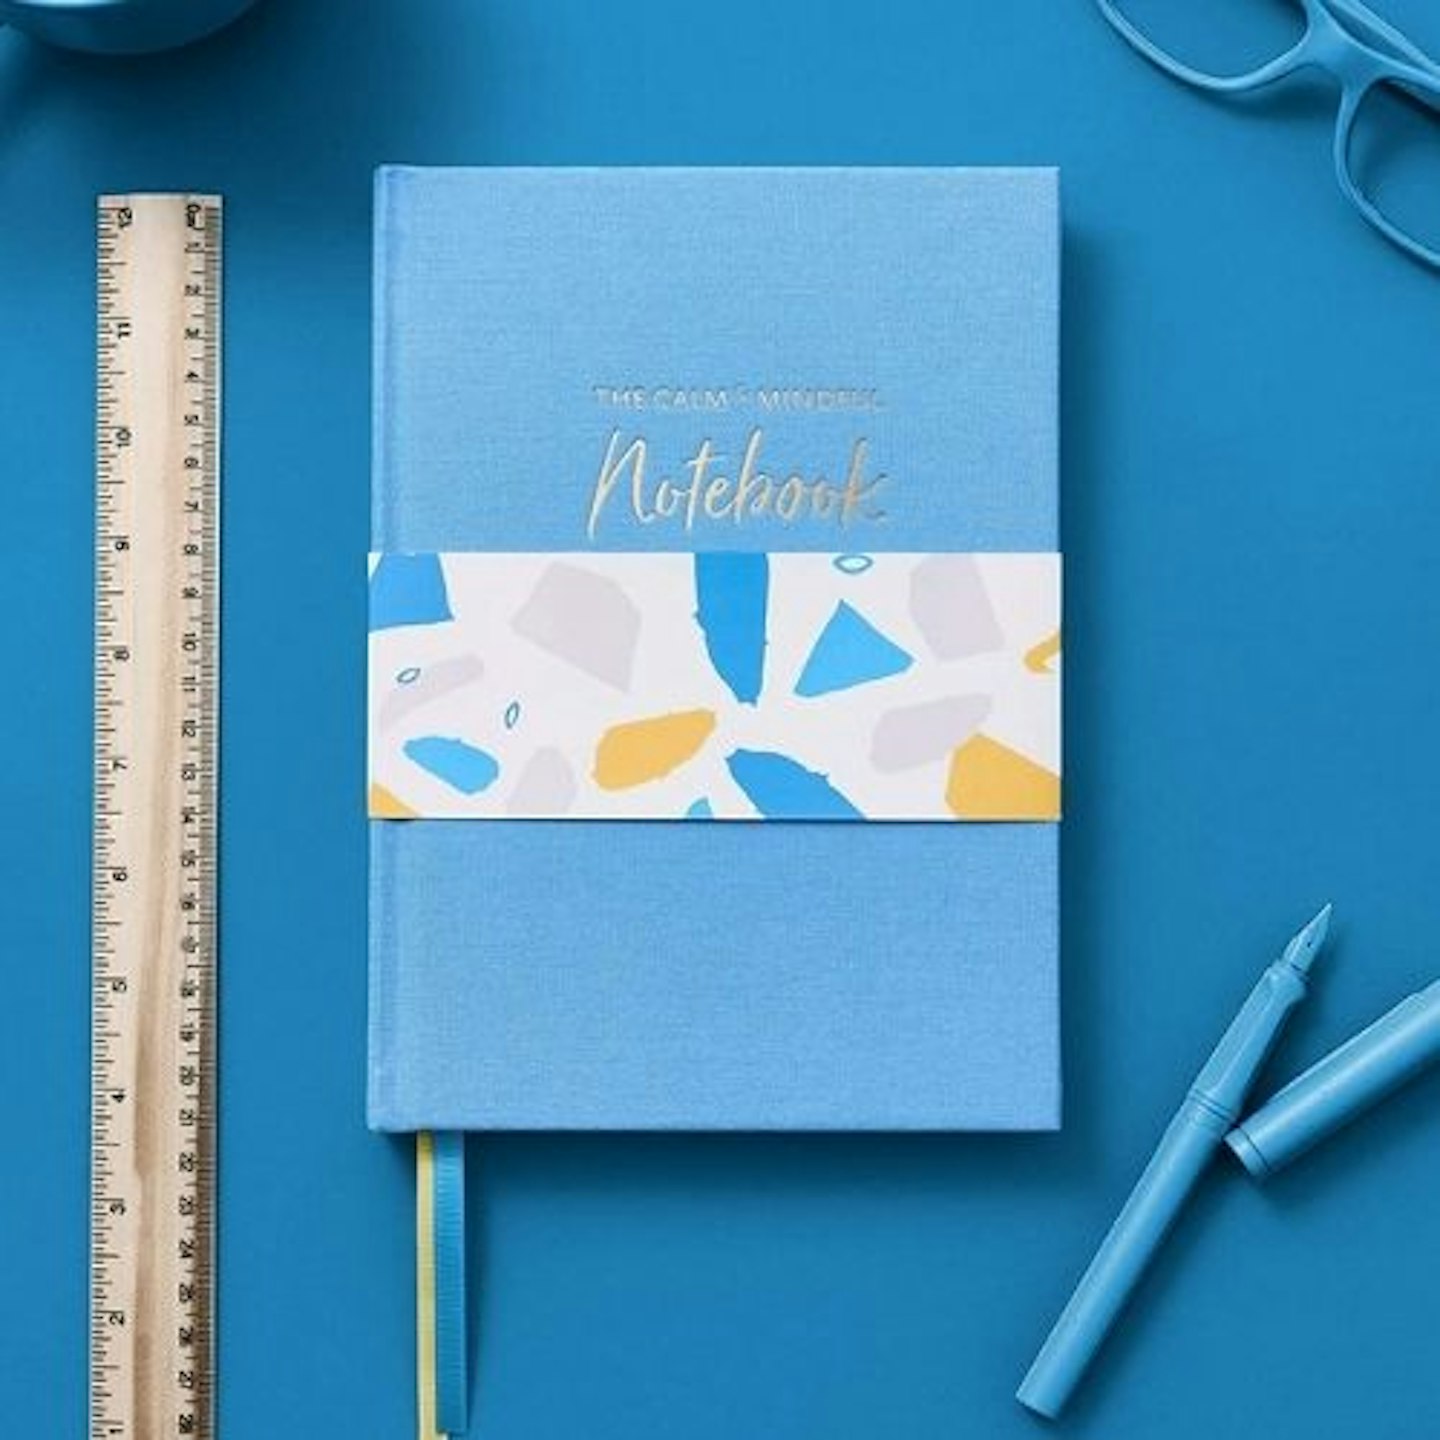 The Calm & Mindful notebook